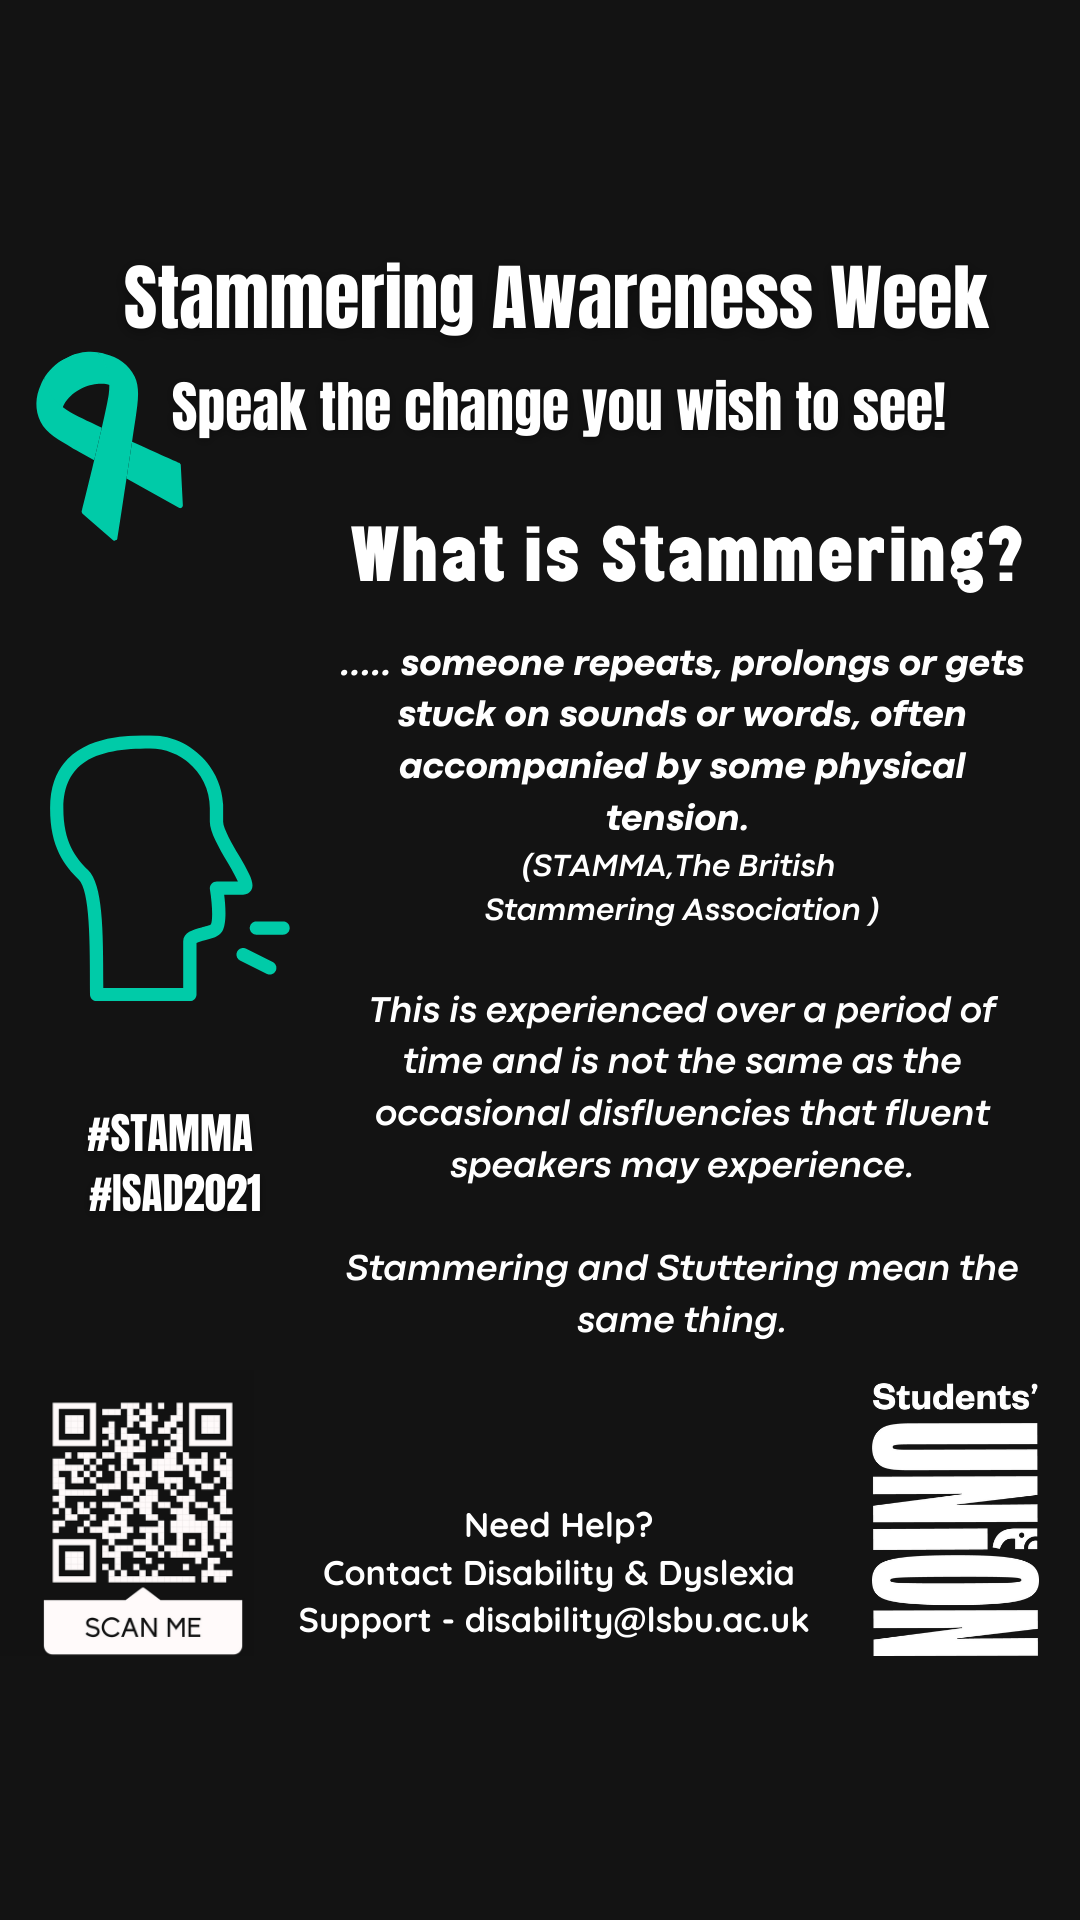 Poster with information on stammering: Stammering is a neurological condition that makes it physically hard to speak. A person who stammers will repeat, prolongs, or get stuck on sounds or words, often accompanied by some kind of physical tension. (Stammer.org)